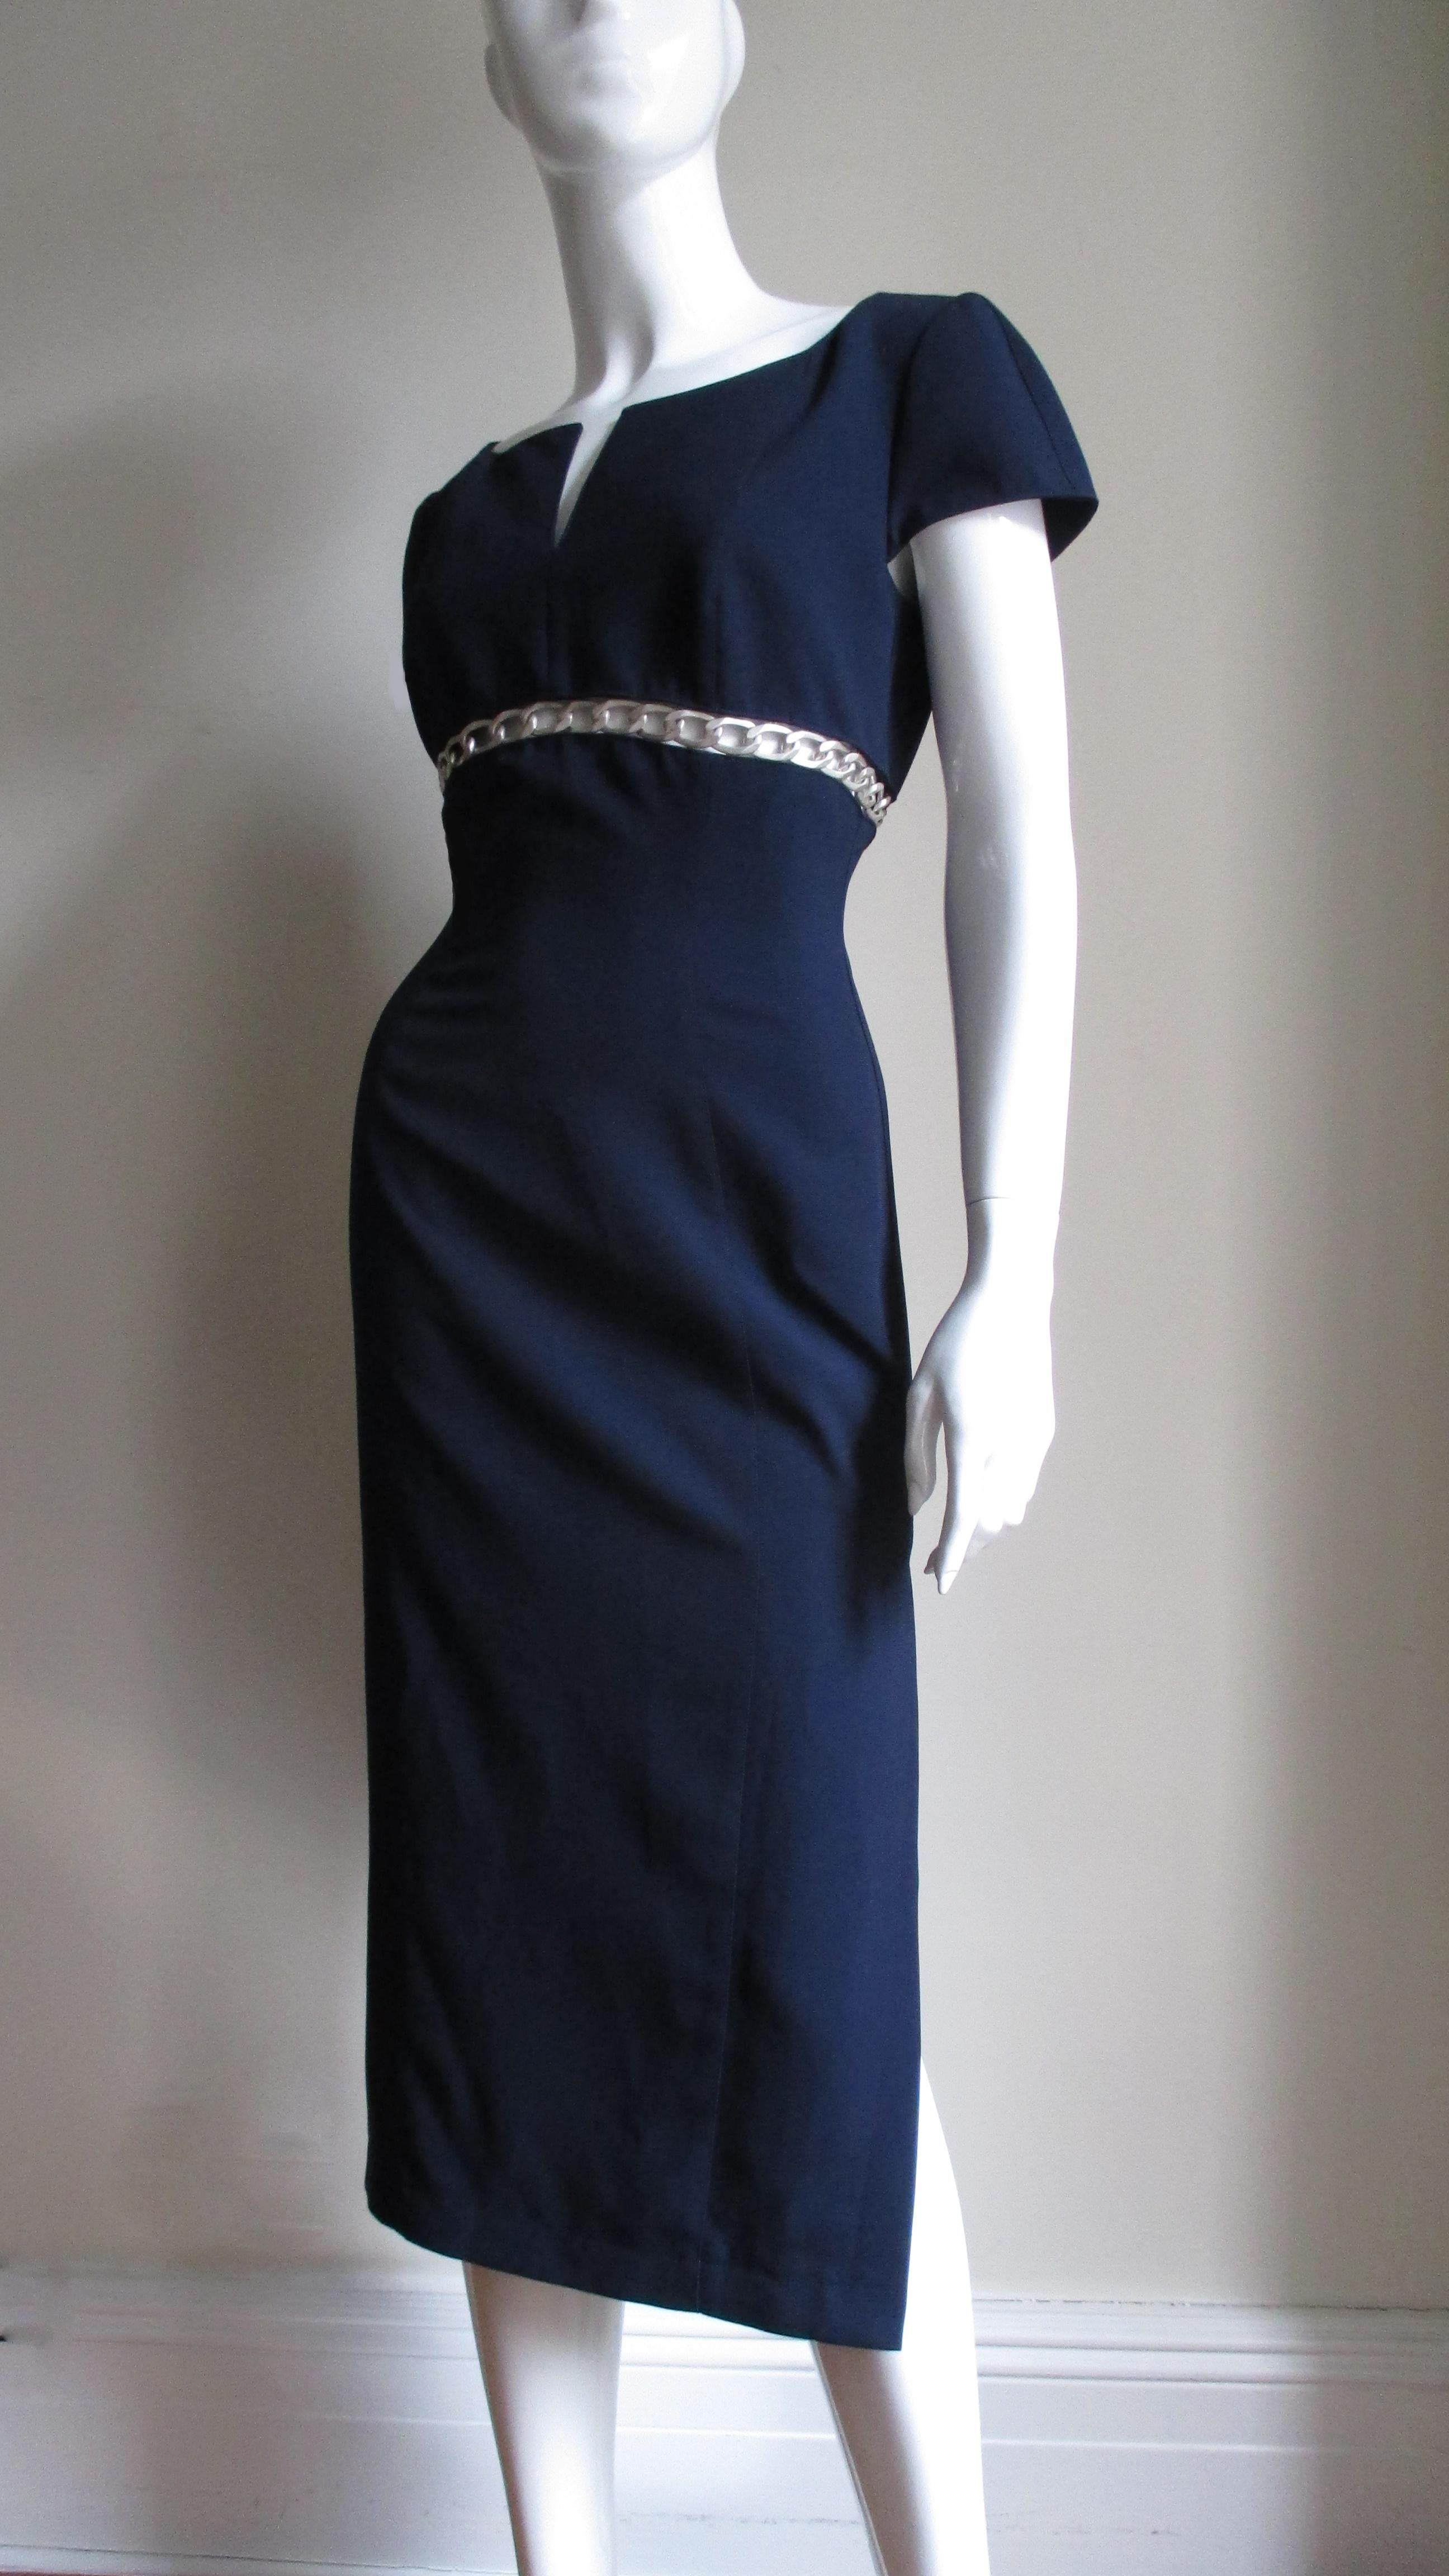 A fabulous navy blue dress from Thierry Mugler. It has a scoop neckline with a center slit, cap sleeves and an inset just under the bust line with a strip of 1